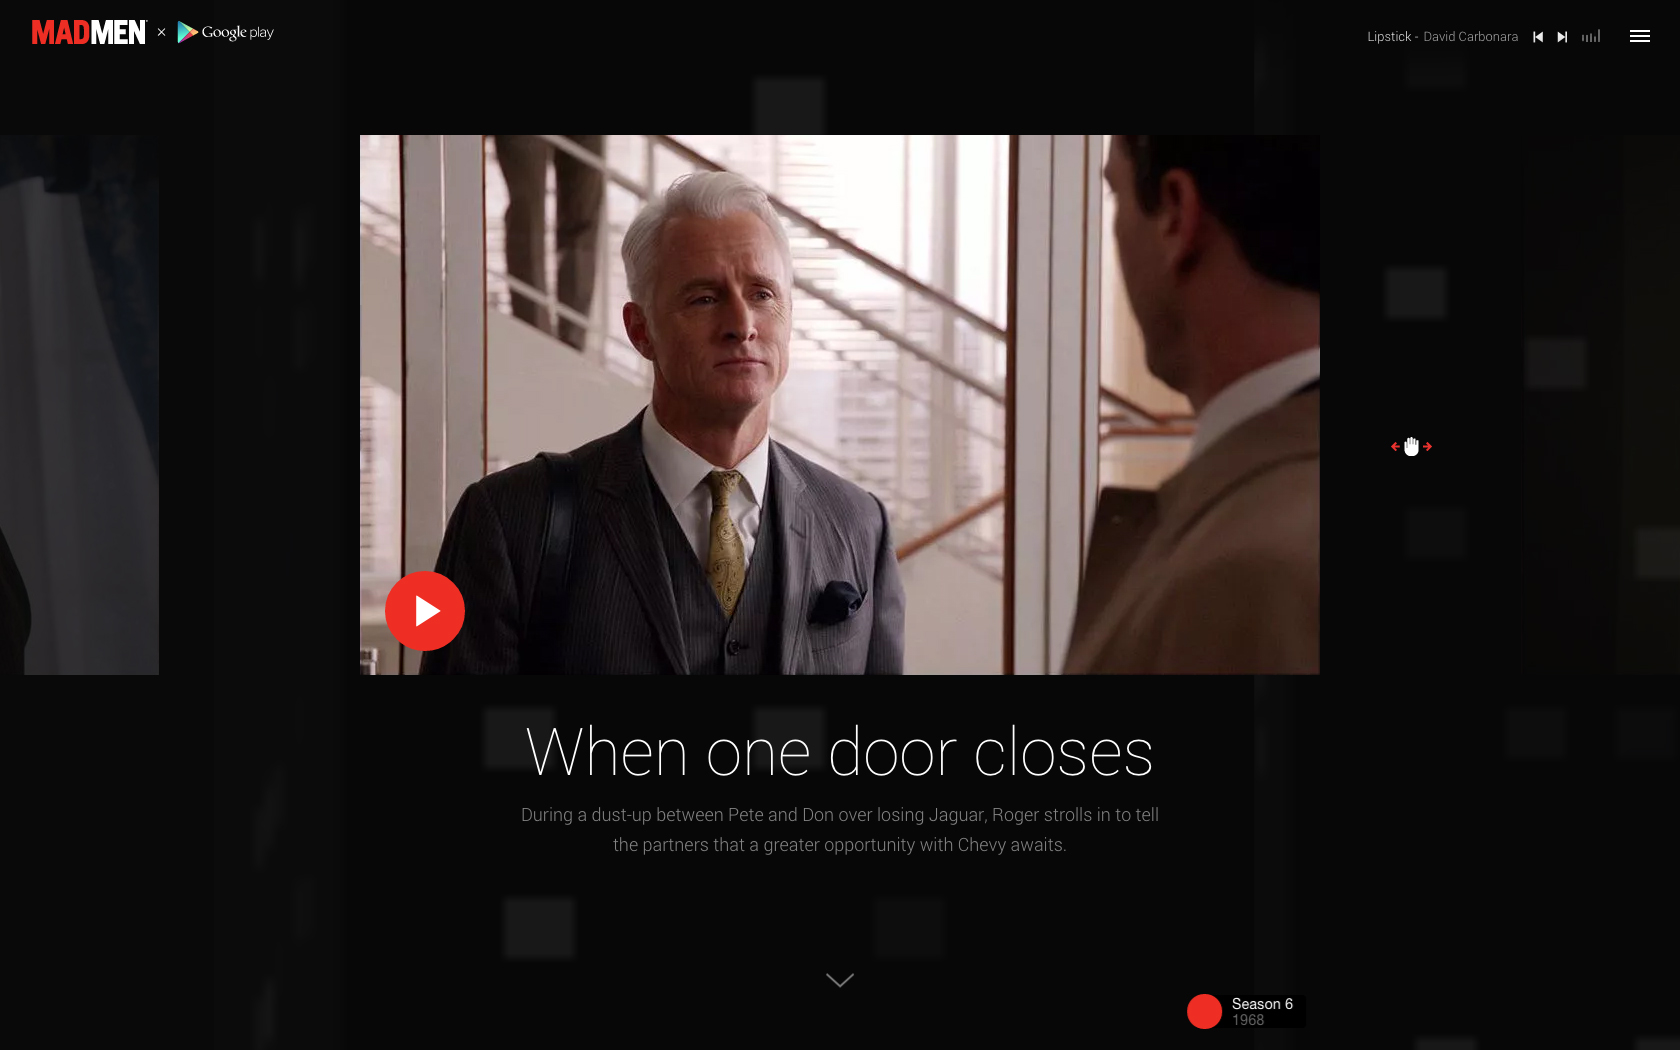 Mad Men with Google Play In commemoration of Mad Men's series finale, we collaborated with Google to build a huge archive of the show's history.